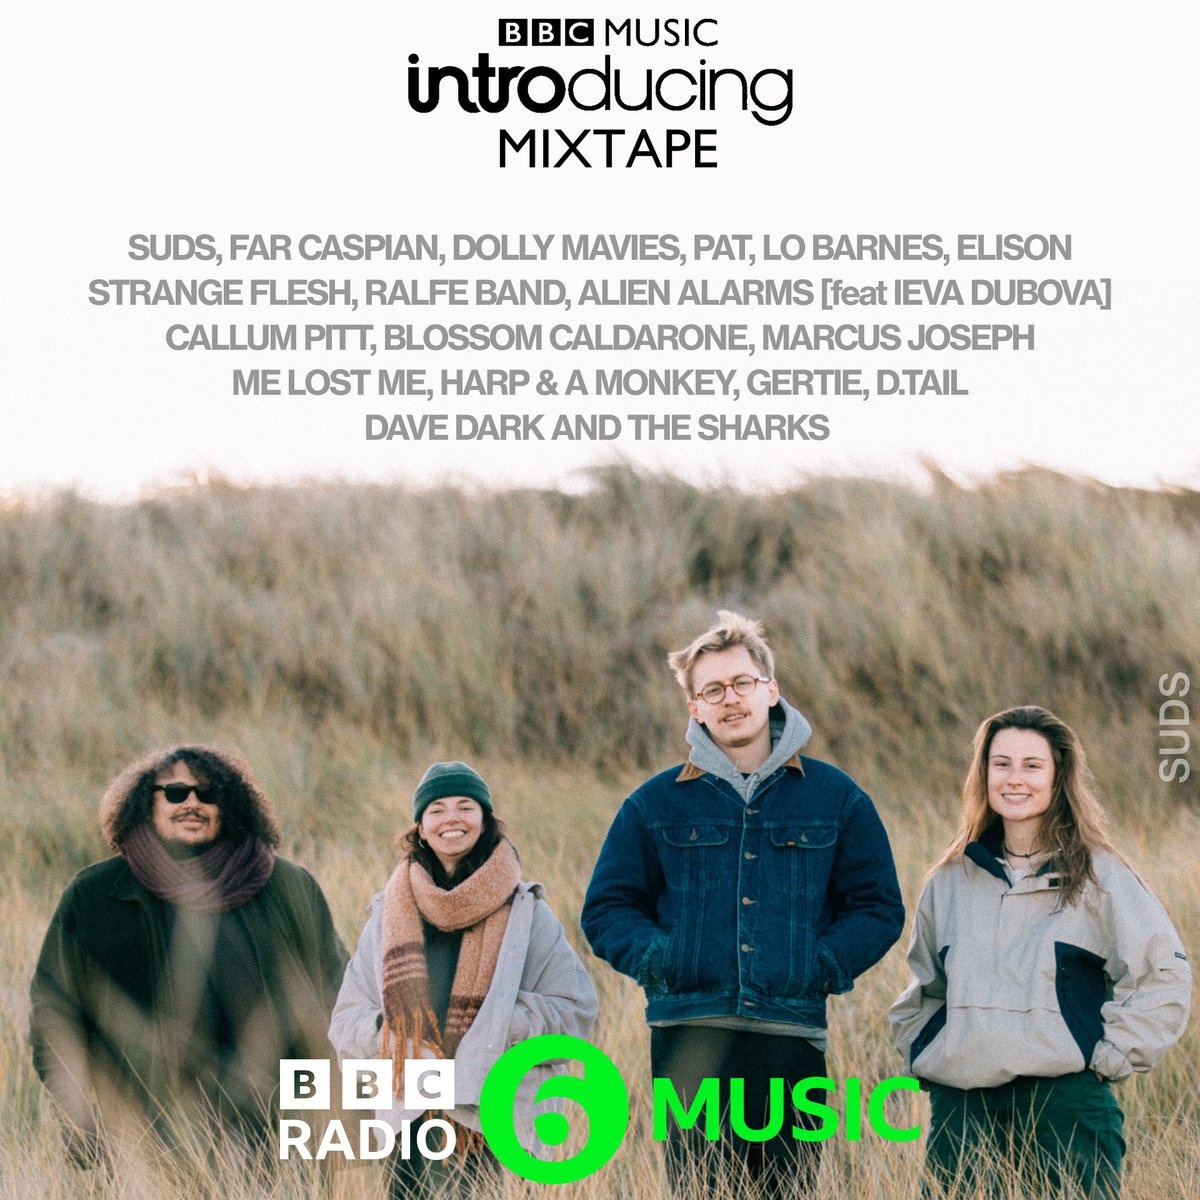 My @BBCIntroducing mixtape drops overnight on @BBC6Music and all podcast platforms including @BBCSounds - just search 'BBC Introducing Mixtape' to subscribe. See bbc.co.uk/blogs/introduc… for full tracklist and links to all artists...